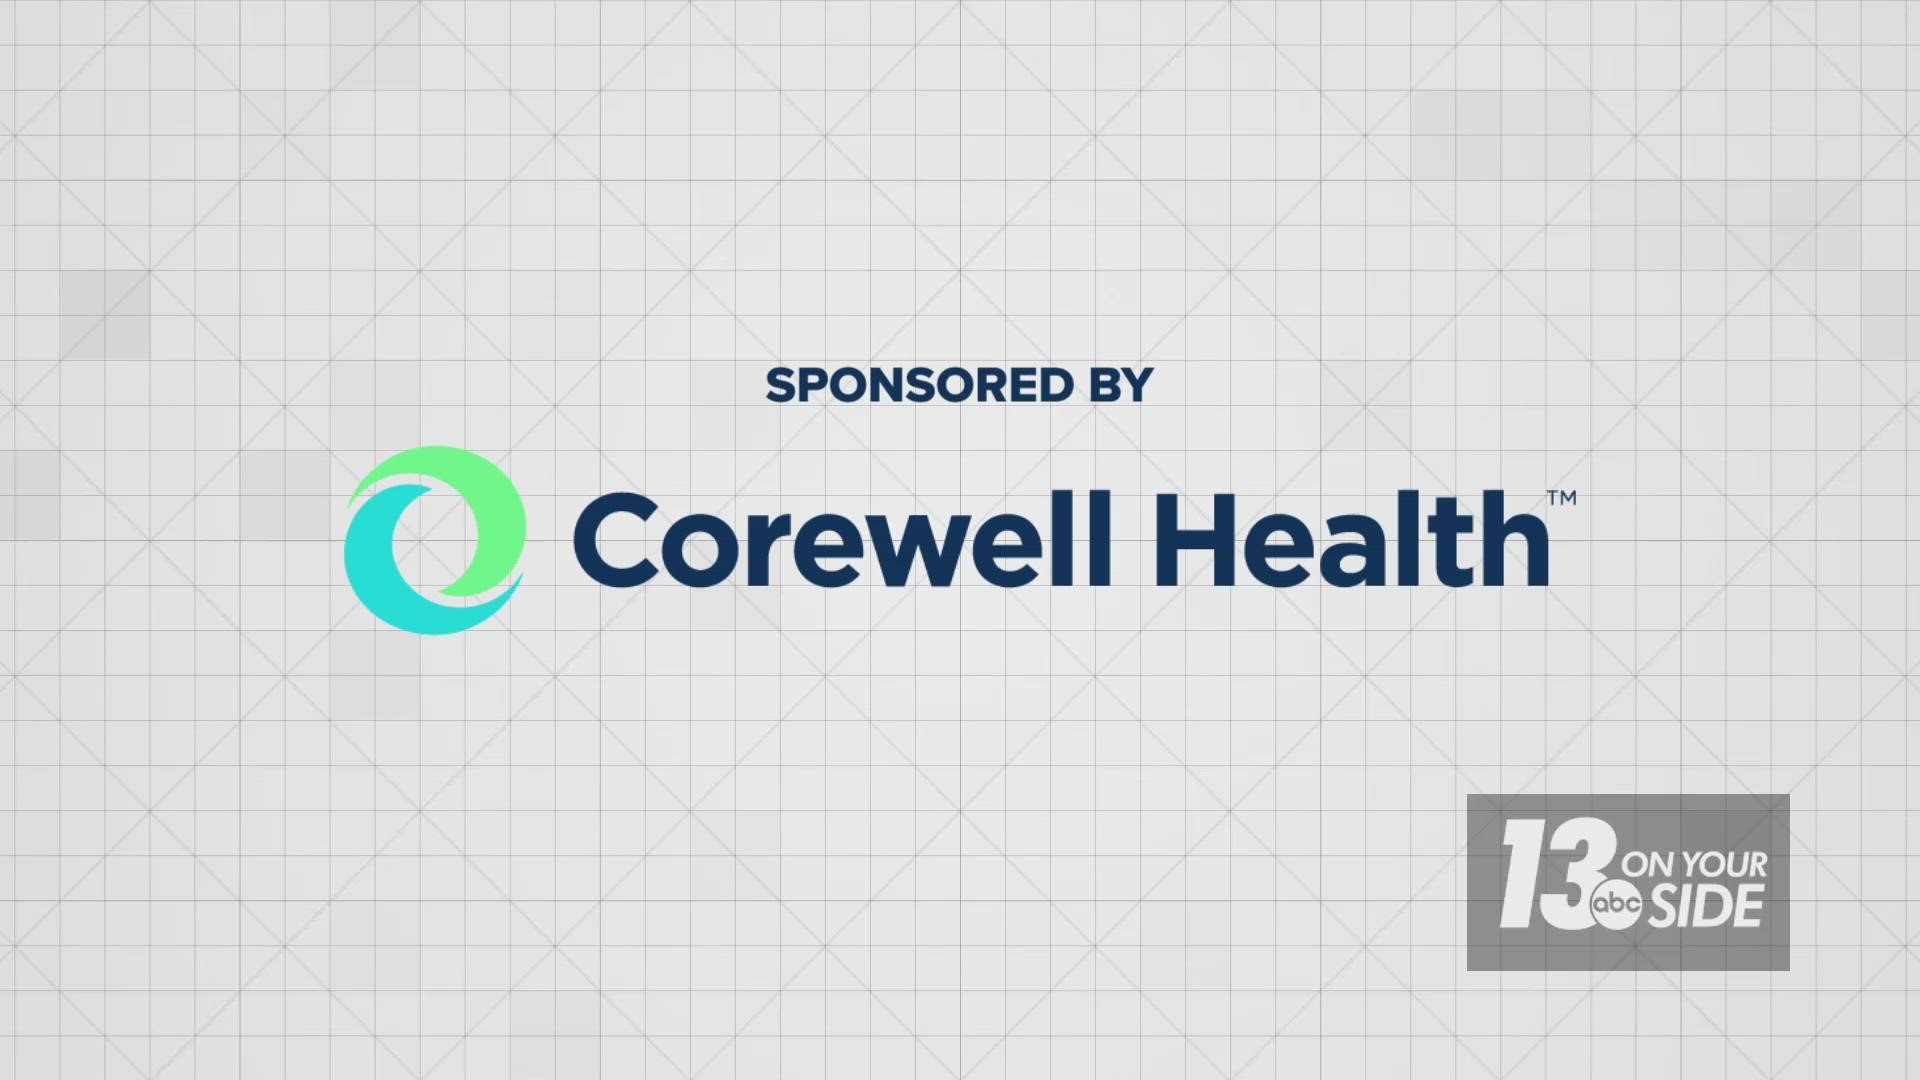 Dr. Jennifer Johnston is a radiologist at Corewell Health and she explained the additional screening tools and how they differ from traditional breast MRI.